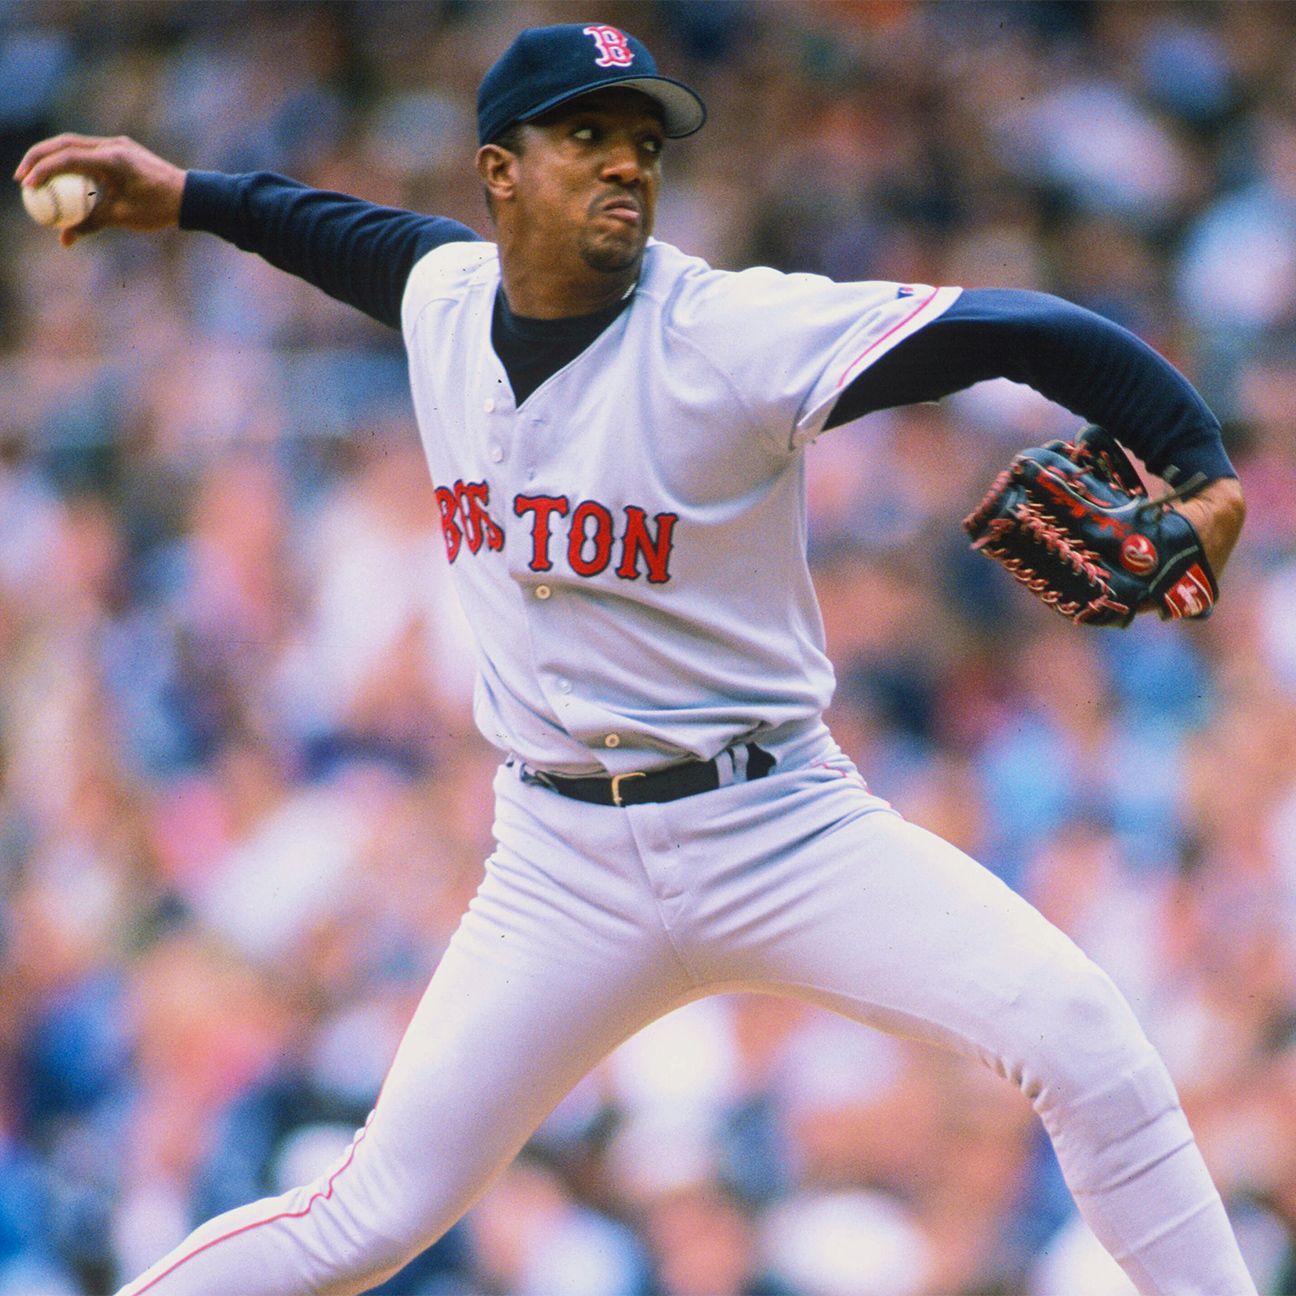 Pedro Martinez will be the 14th Latino ballplayer in the Hall of Fame